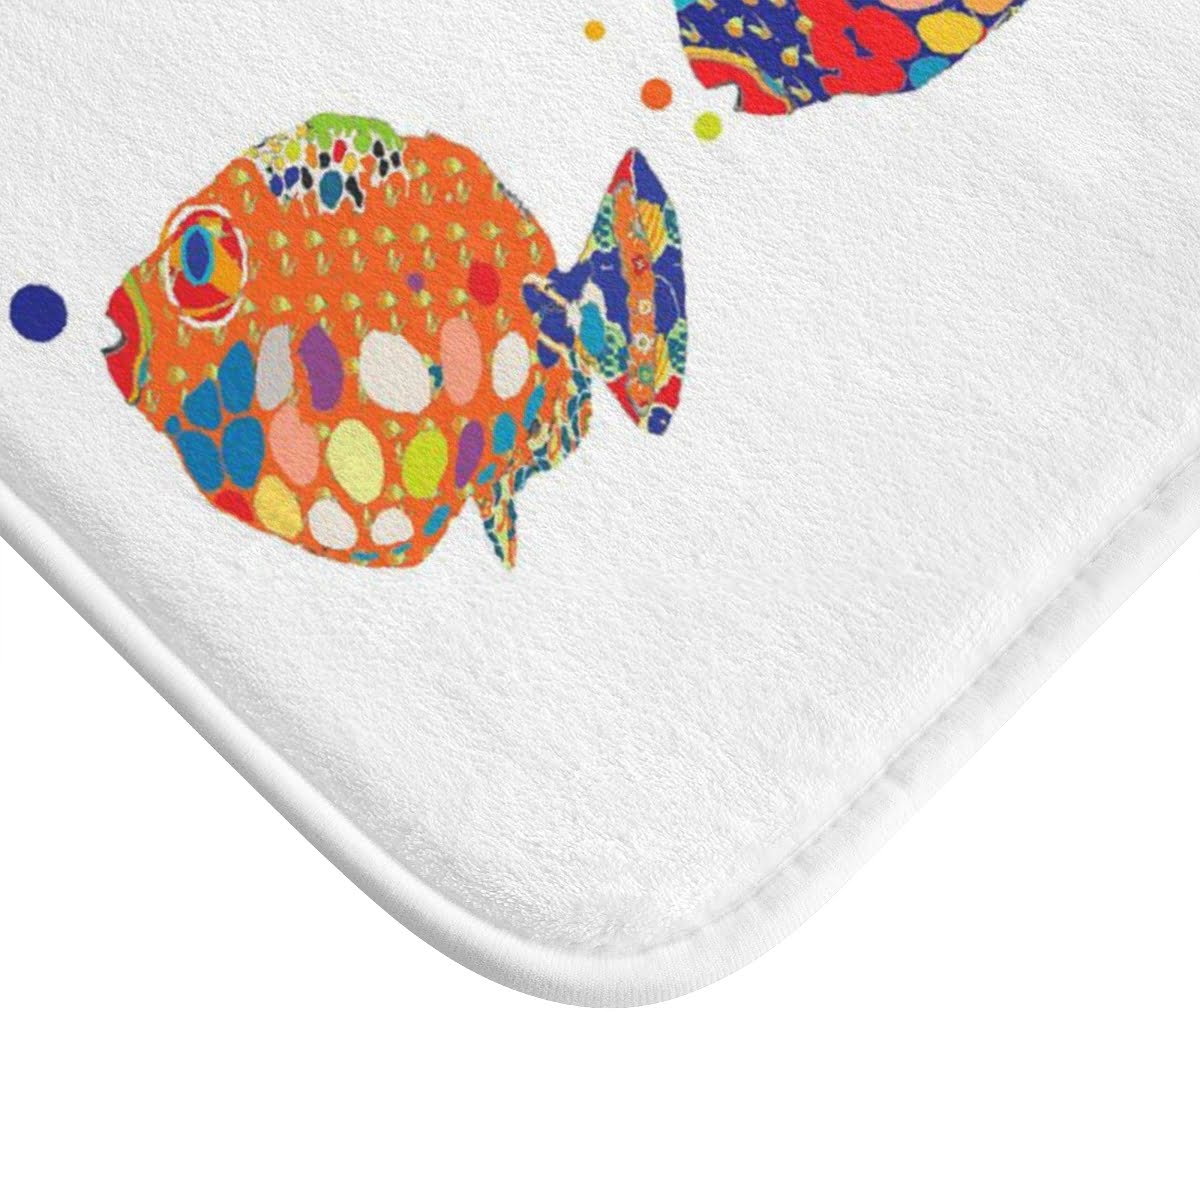 A colorful kids bath mat adorned with vibrant fish patterns, perfect for a kids' bathroom. Mold and mildew resistant, quick-drying, non-slip plush microfiber, washable.